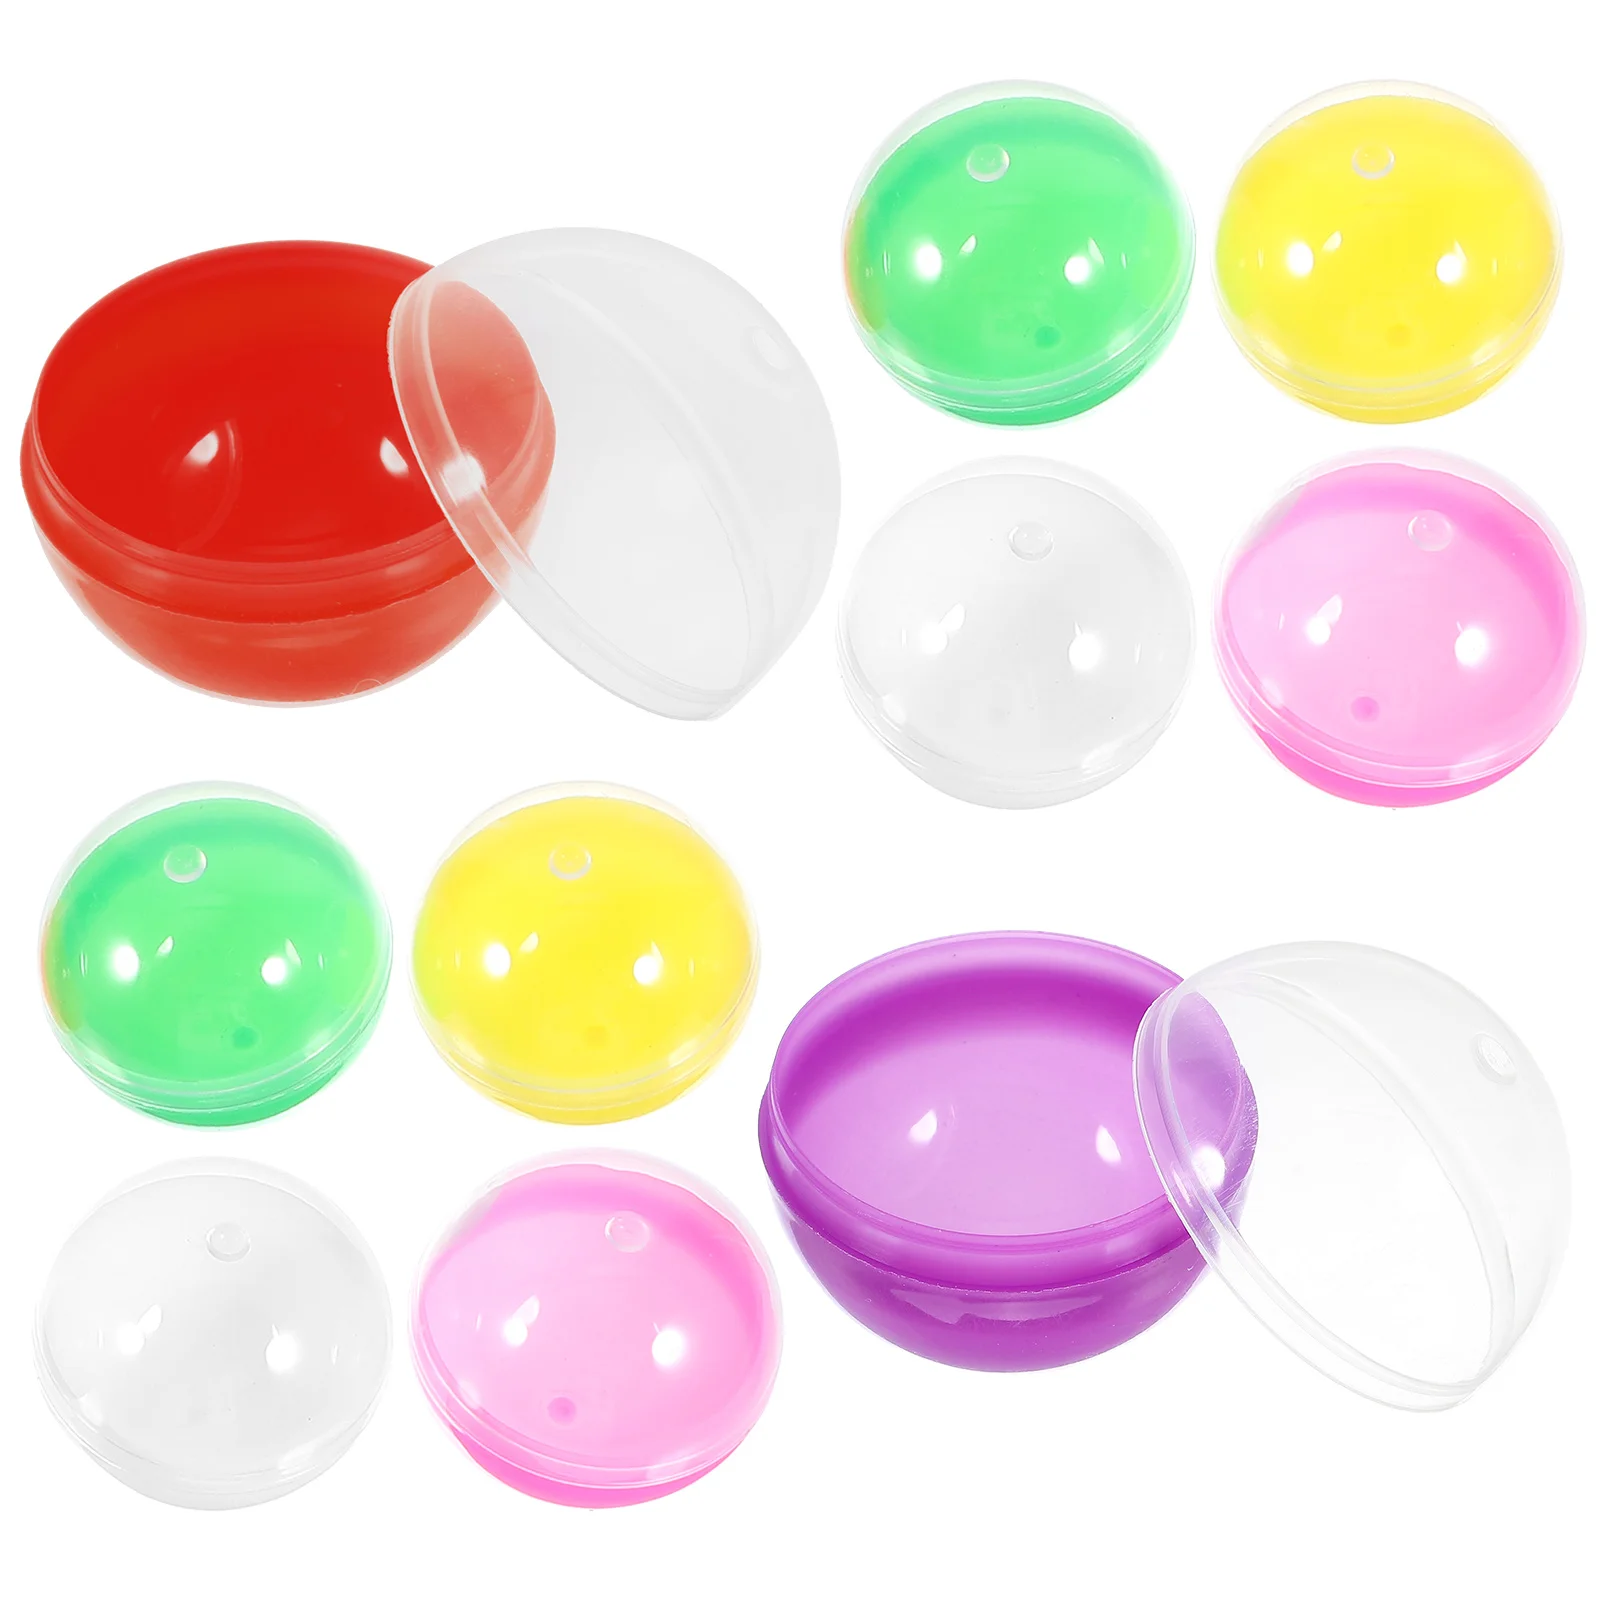 

28mm Plastic Fillable Balls Openable Storage Packing Balls Funny Colored DIY Balls Colorful Balls Multi-use Twisted Balls